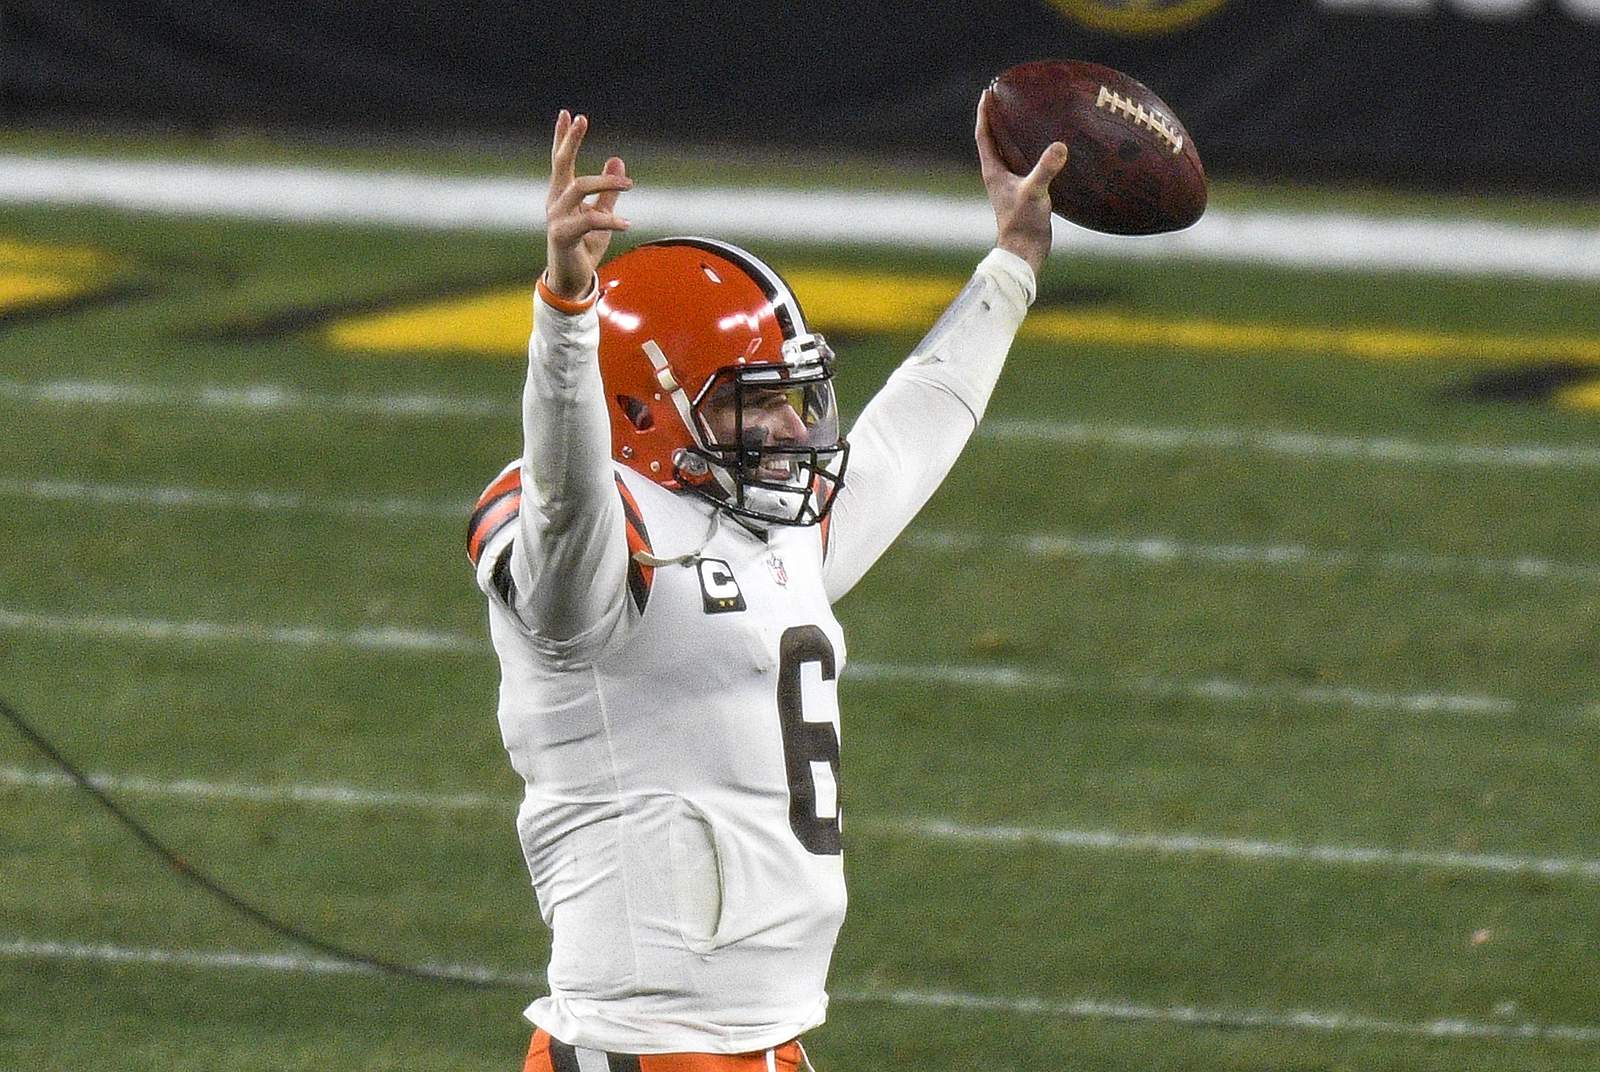 Similarities abound for Browns, Chiefs in first playoff game